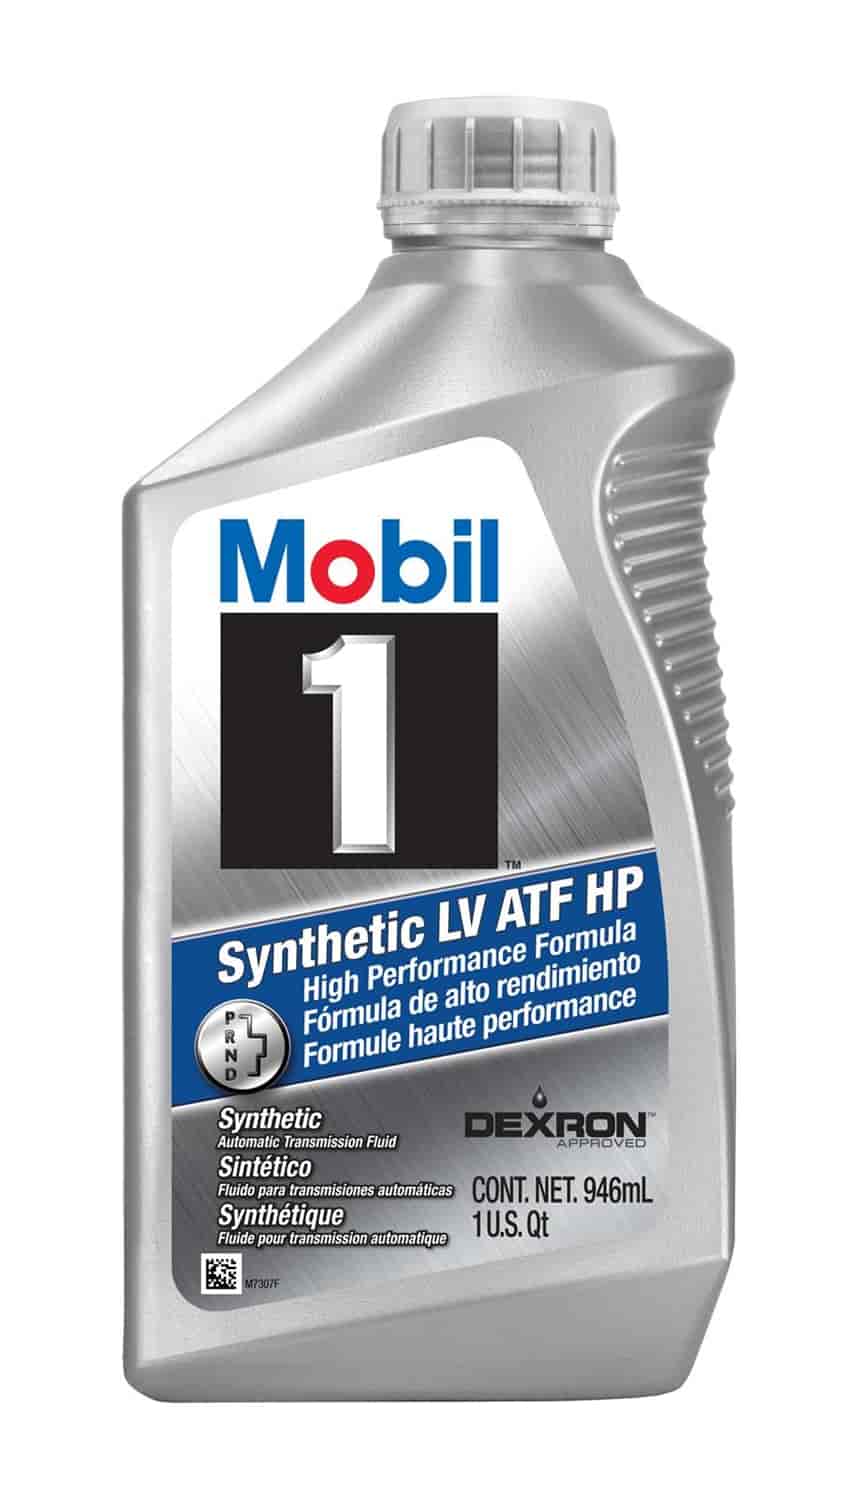 Mobil 1 Synthetic LV ATF HP 1 Quart Bottle Sold Individually